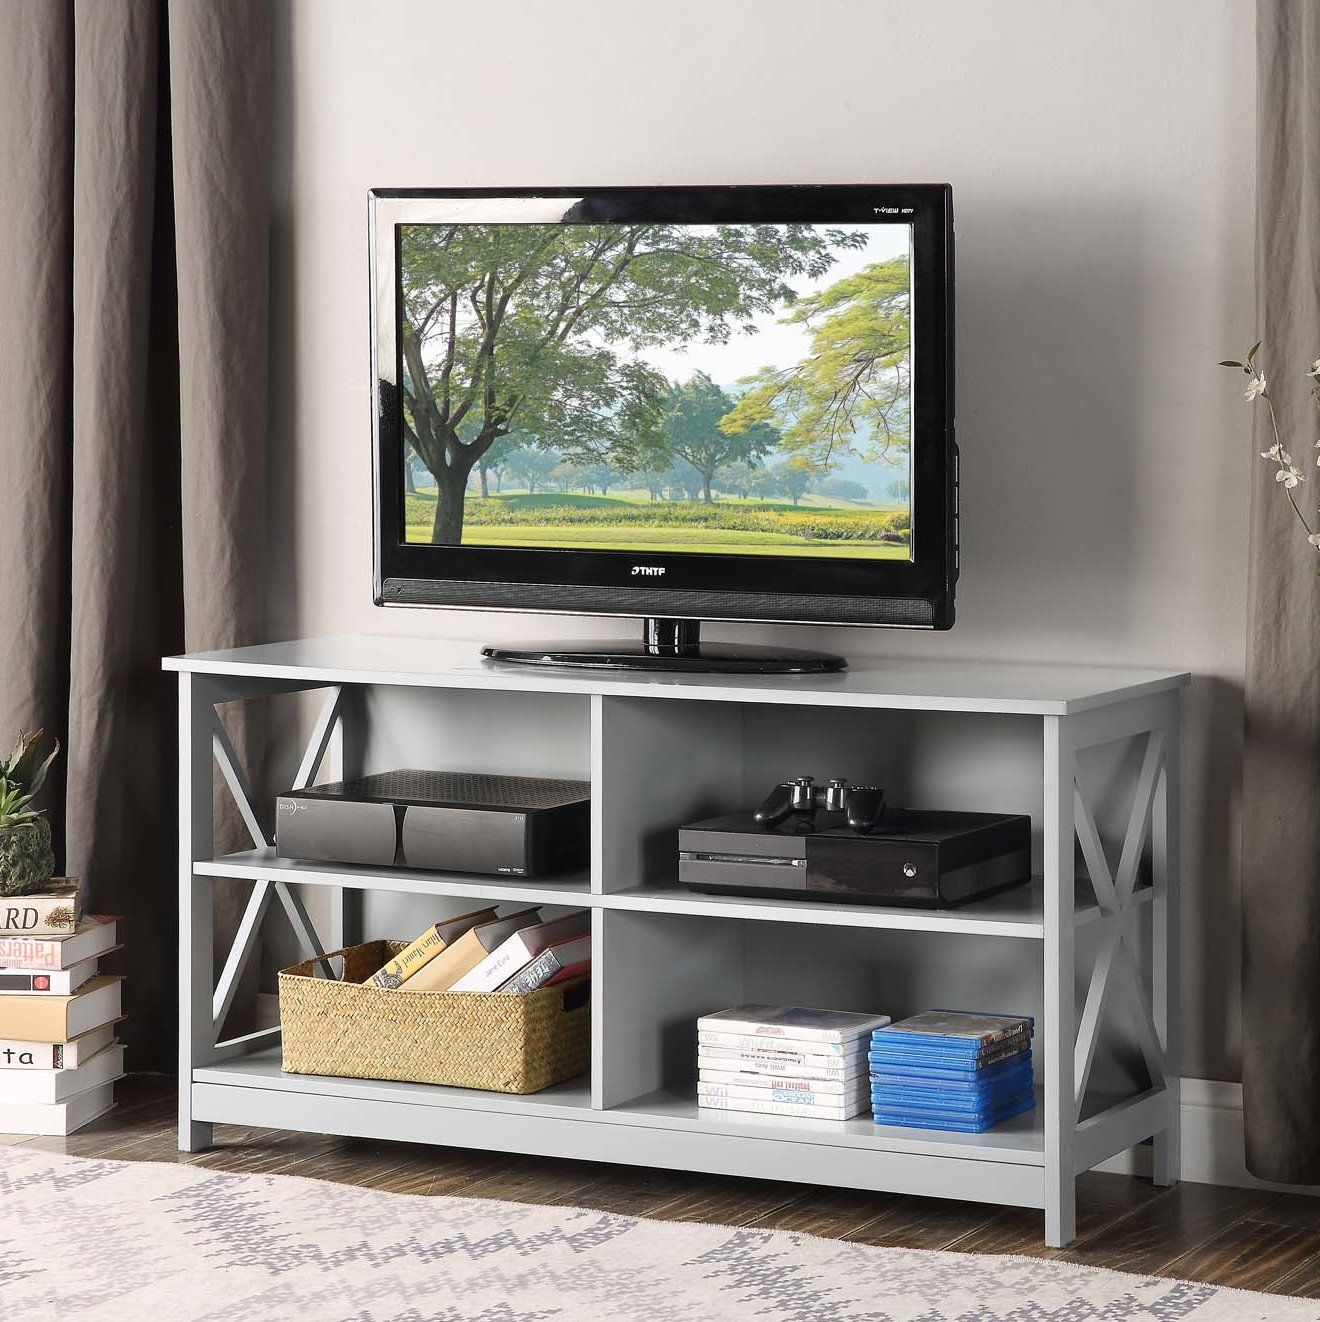 Stoneford Tv Stand For Tvs Up To 48" Pertaining To Ericka Tv Stands For Tvs Up To 42" (View 11 of 30)